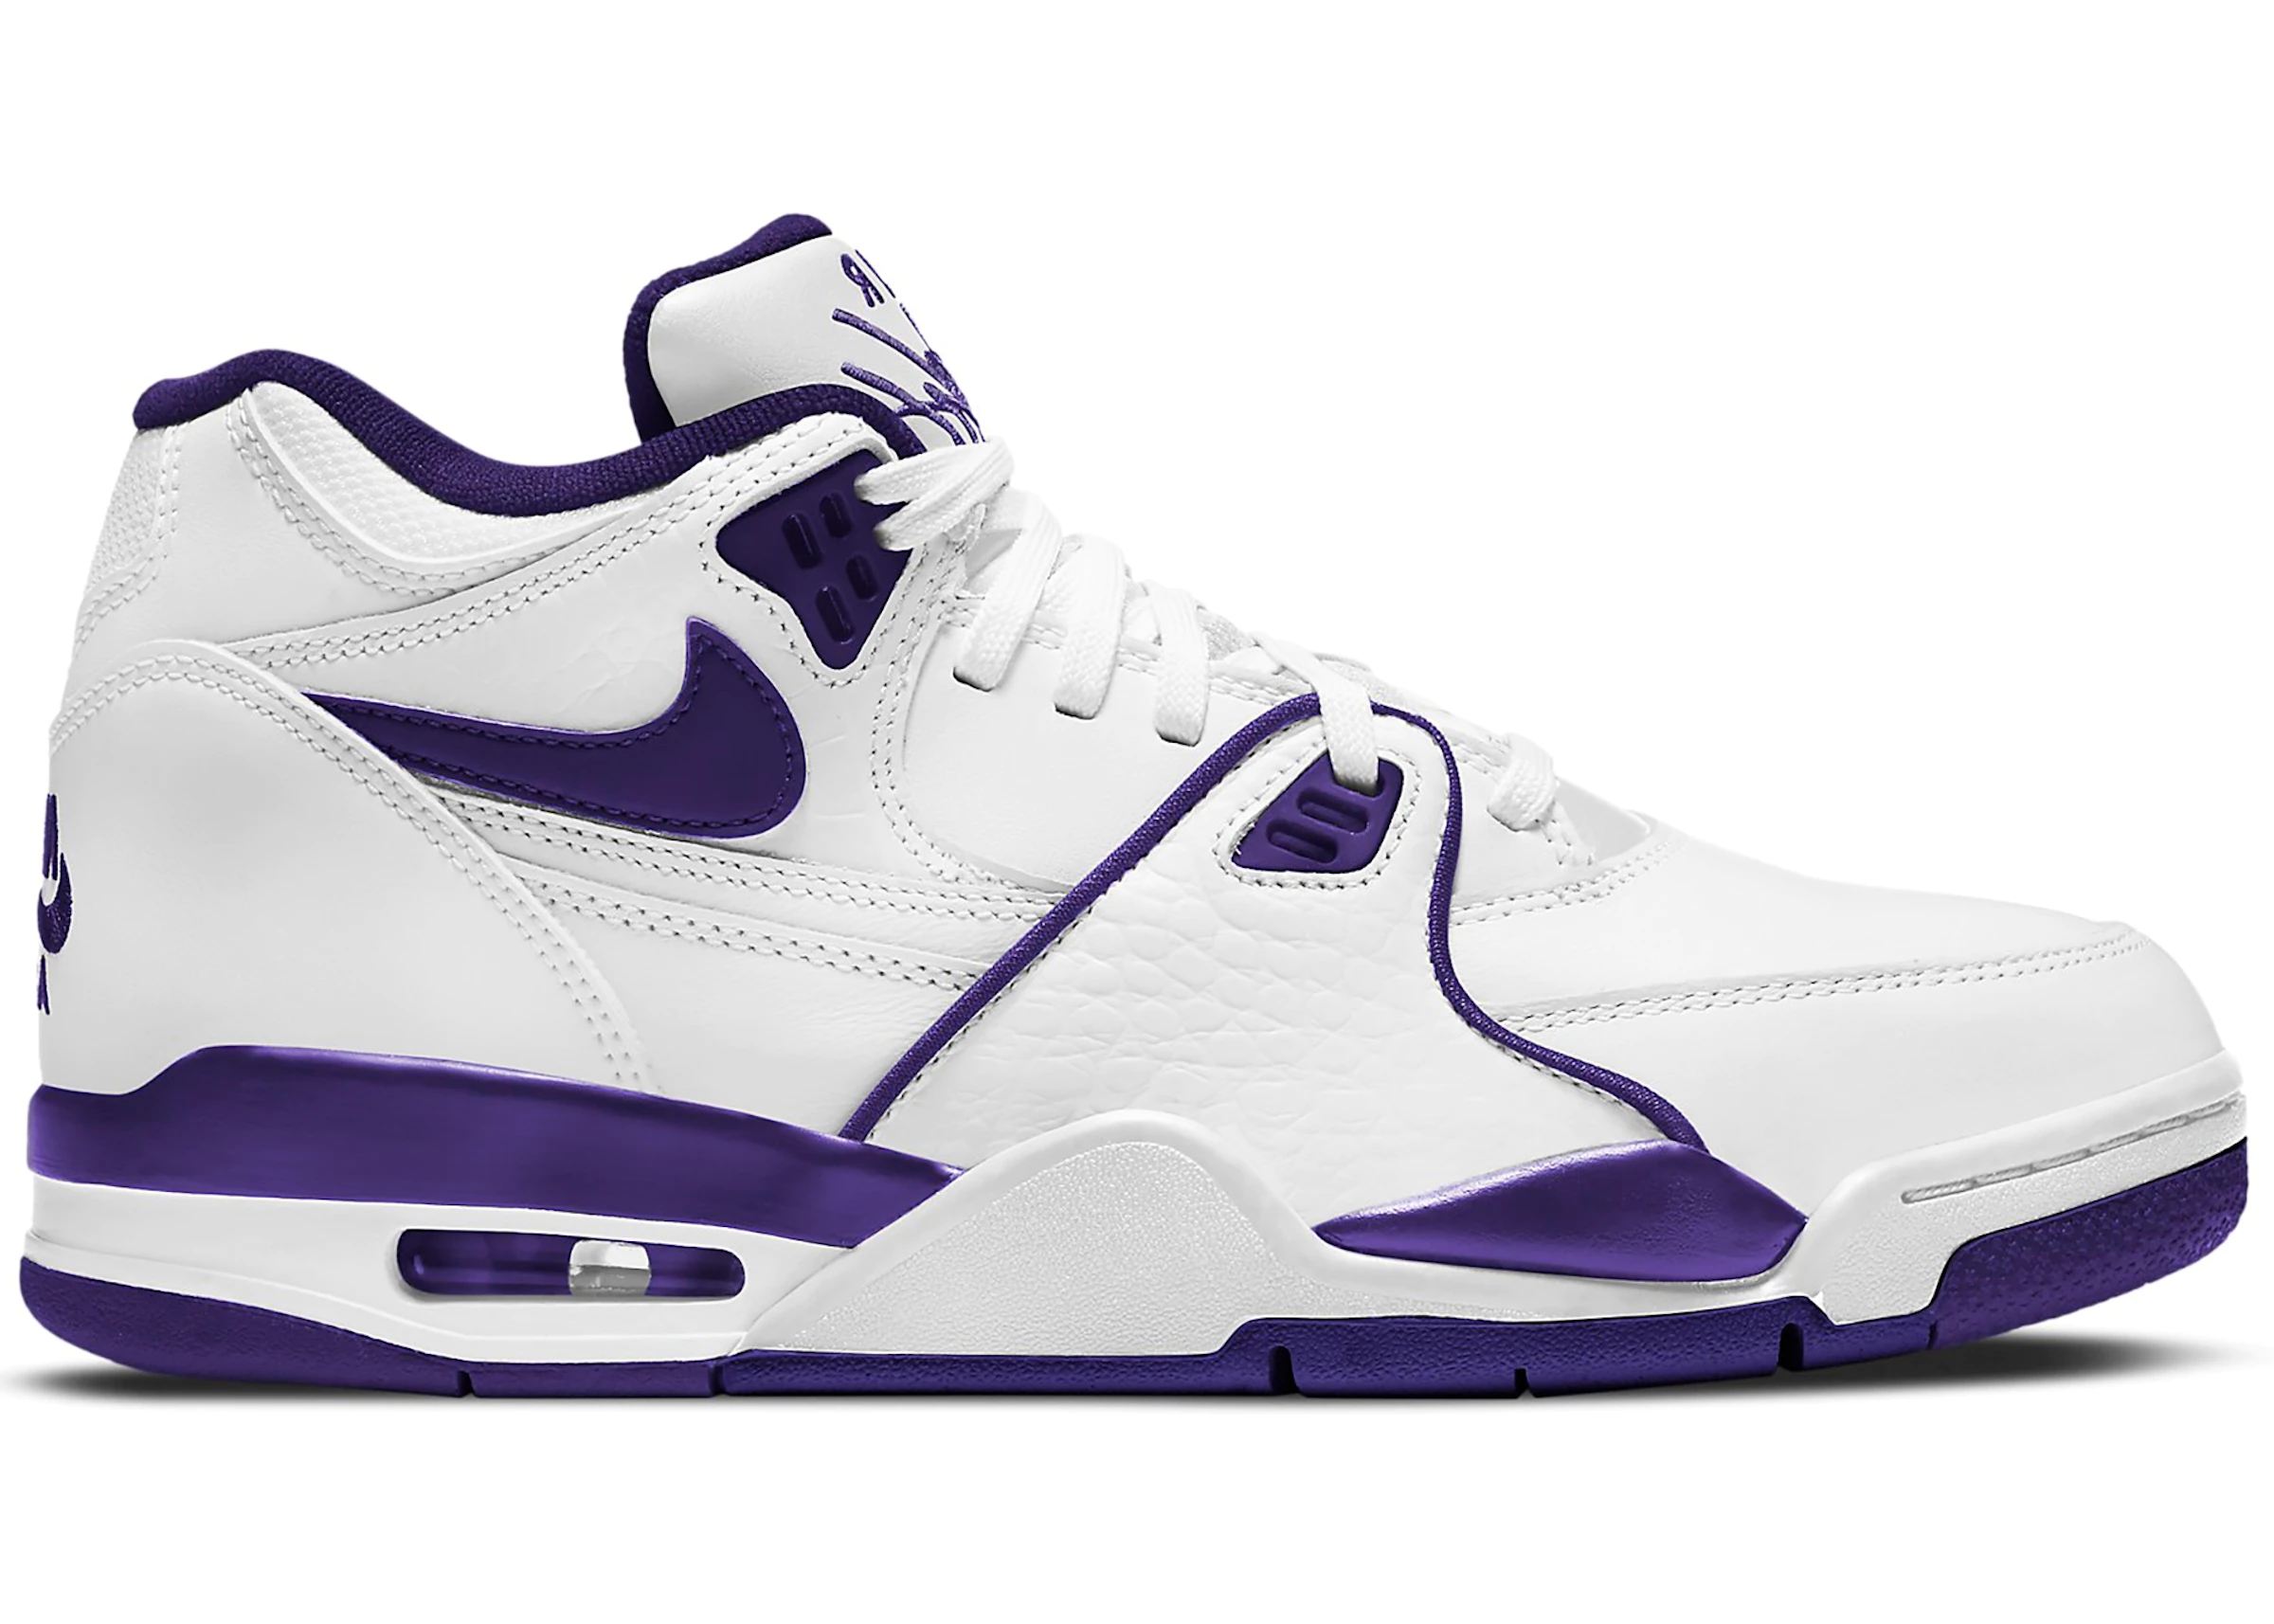 Cathedral fish Ambitious Nike Air Flight 89 White Court Purple - CN0050-101 - US